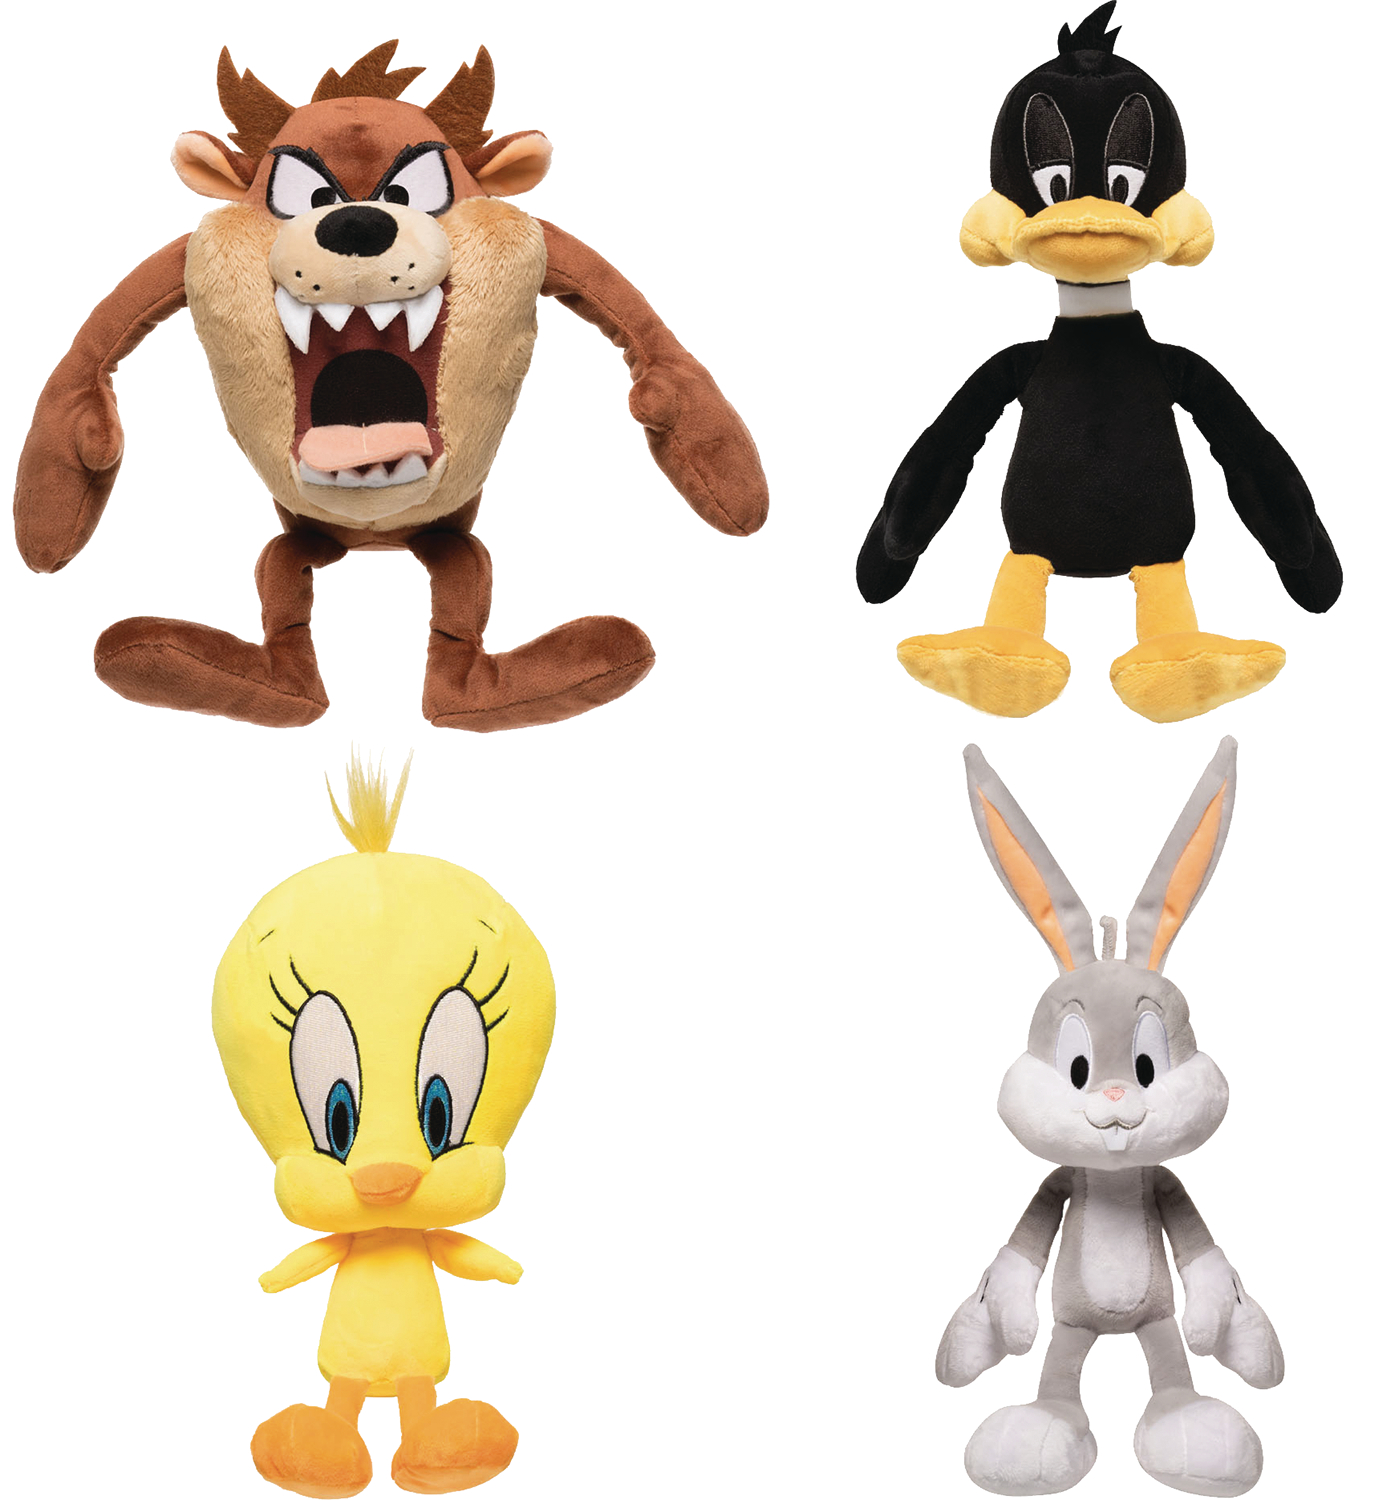 Official Funko Plush Looney Tunes Soft Plush Toys In 4 Different TV Characters 